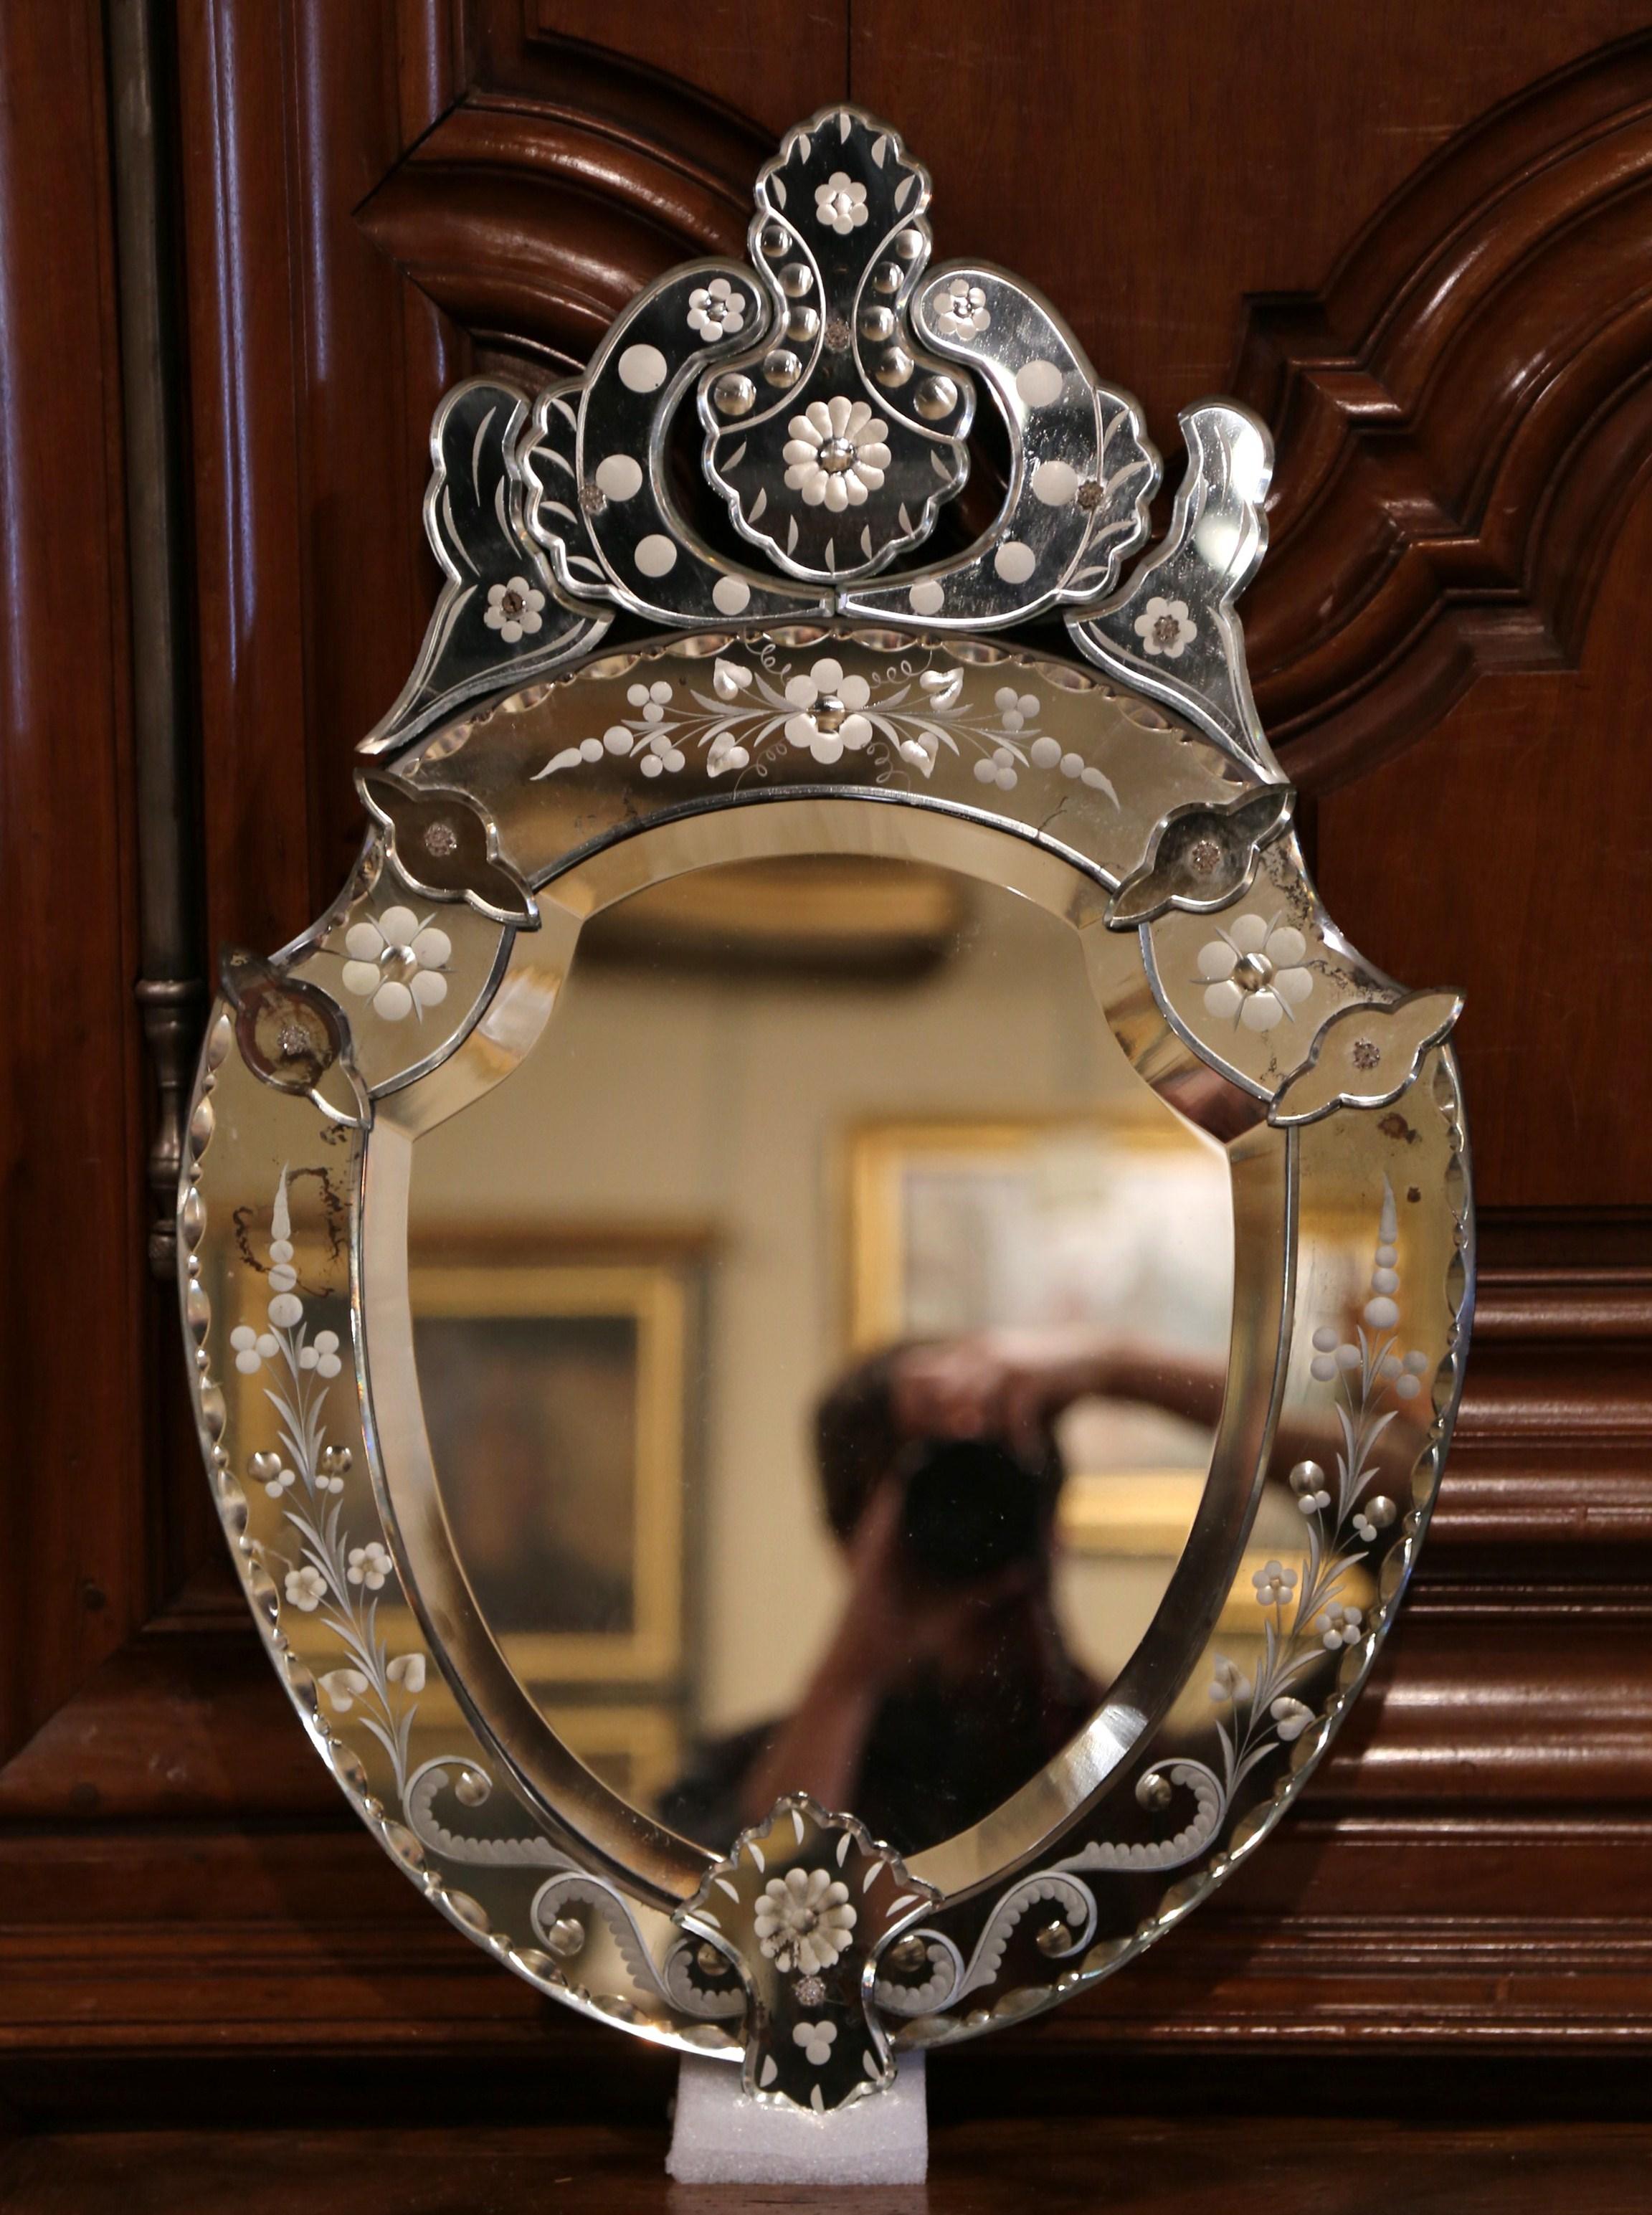 19th Century Mid-20th Century Italian Venetian Beveled Mirror with Painted Floral Etching